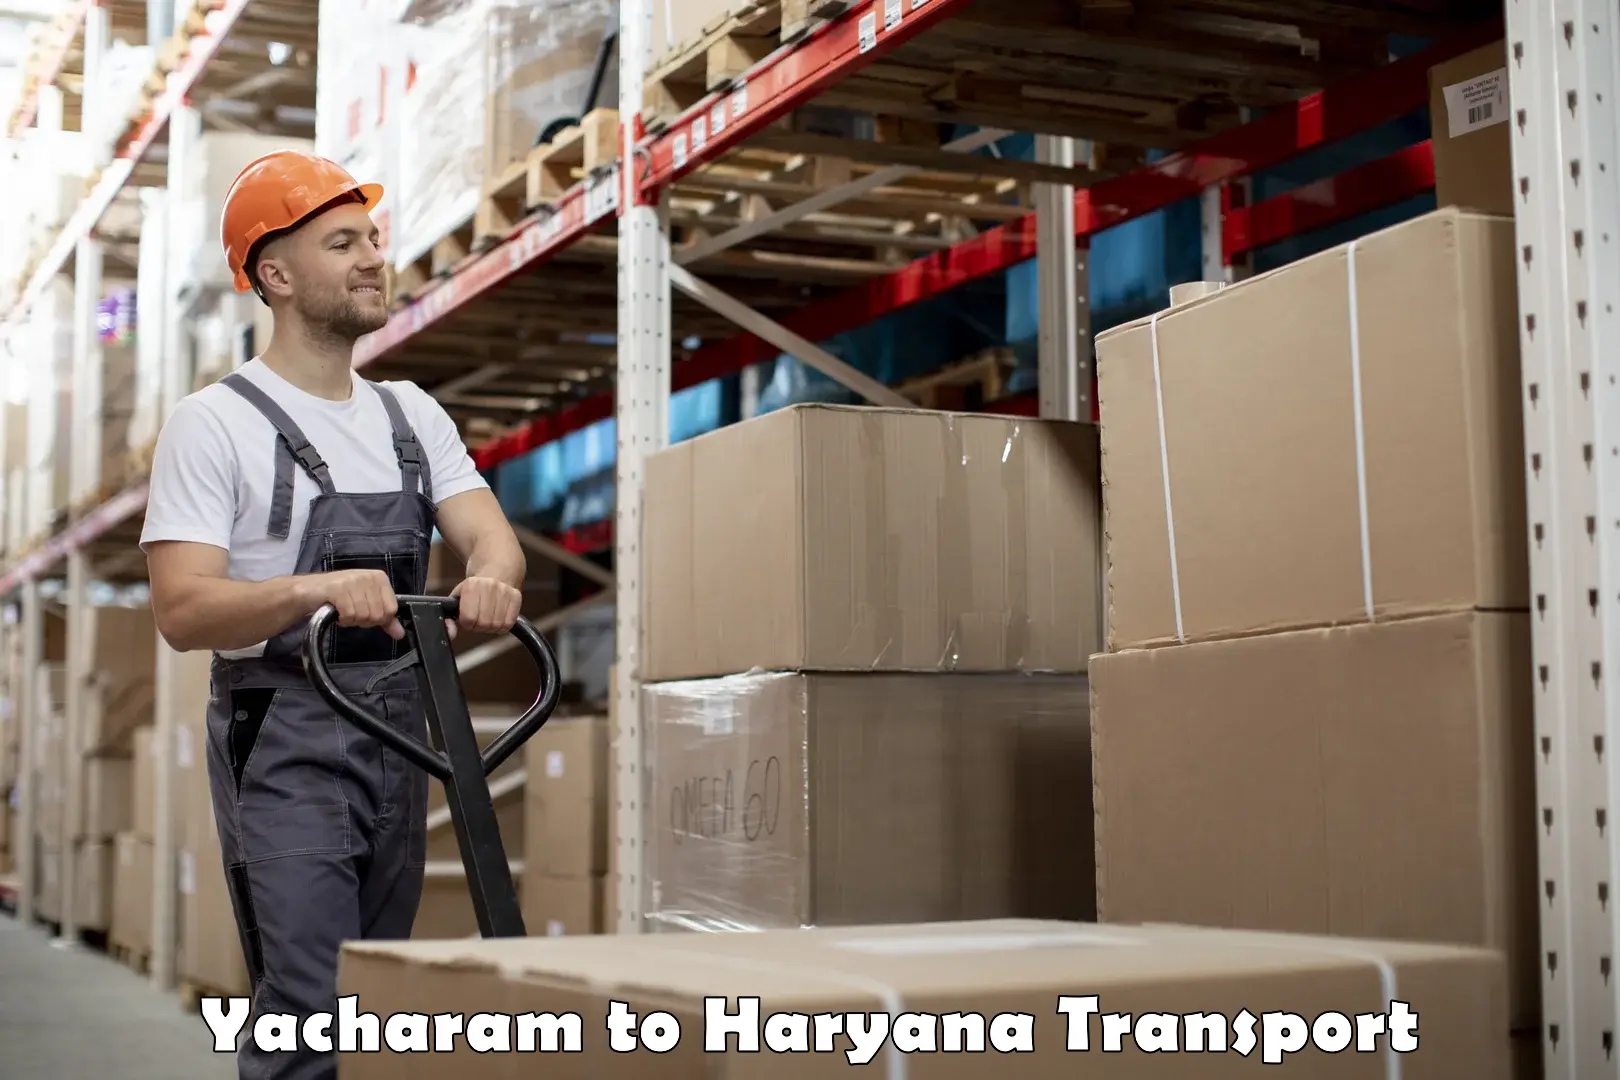 Road transport online services Yacharam to Chaudhary Charan Singh Haryana Agricultural University Hisar